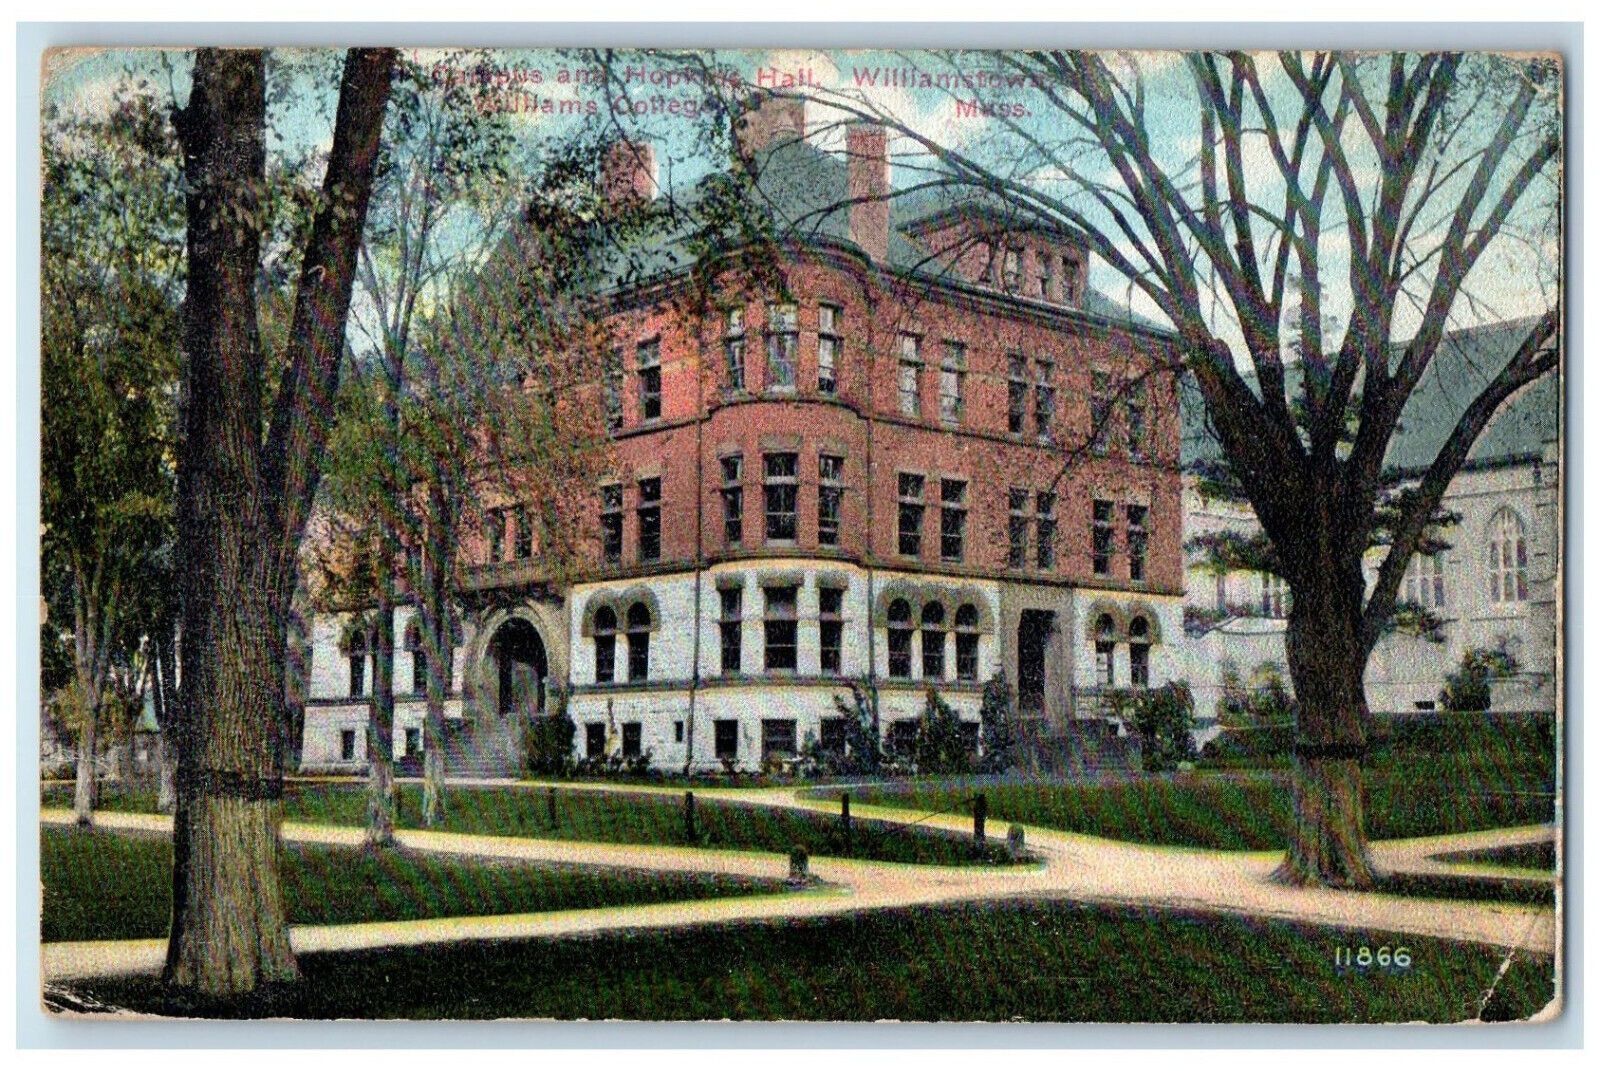 1911 Campus And Hopkins Hall Williams College Building Williamstown MA Postcard